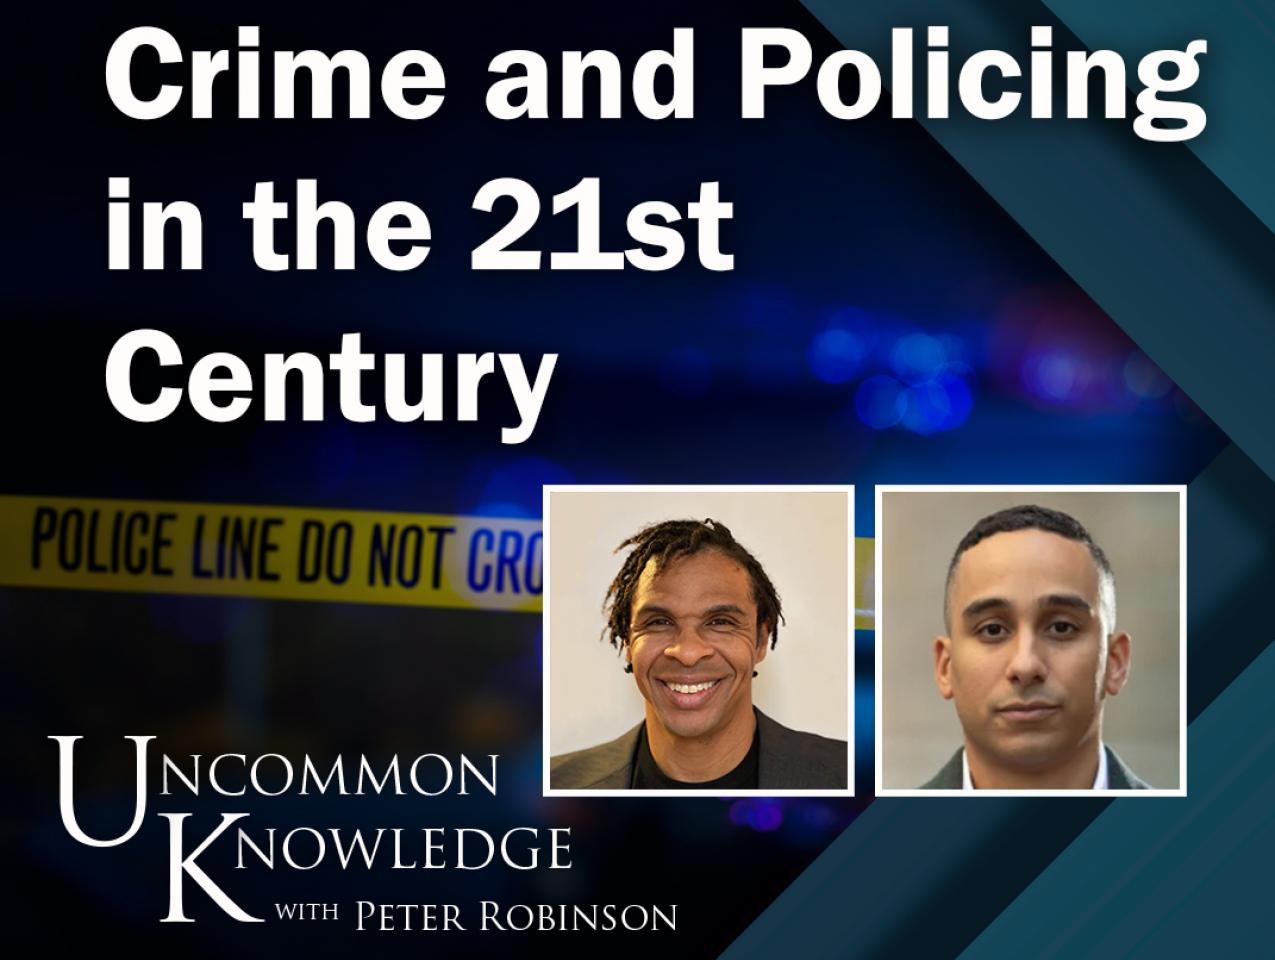 Image for Do Not Defund: Roland Fryer and Rafael Mangual on Crime and Policing in the 21st Century